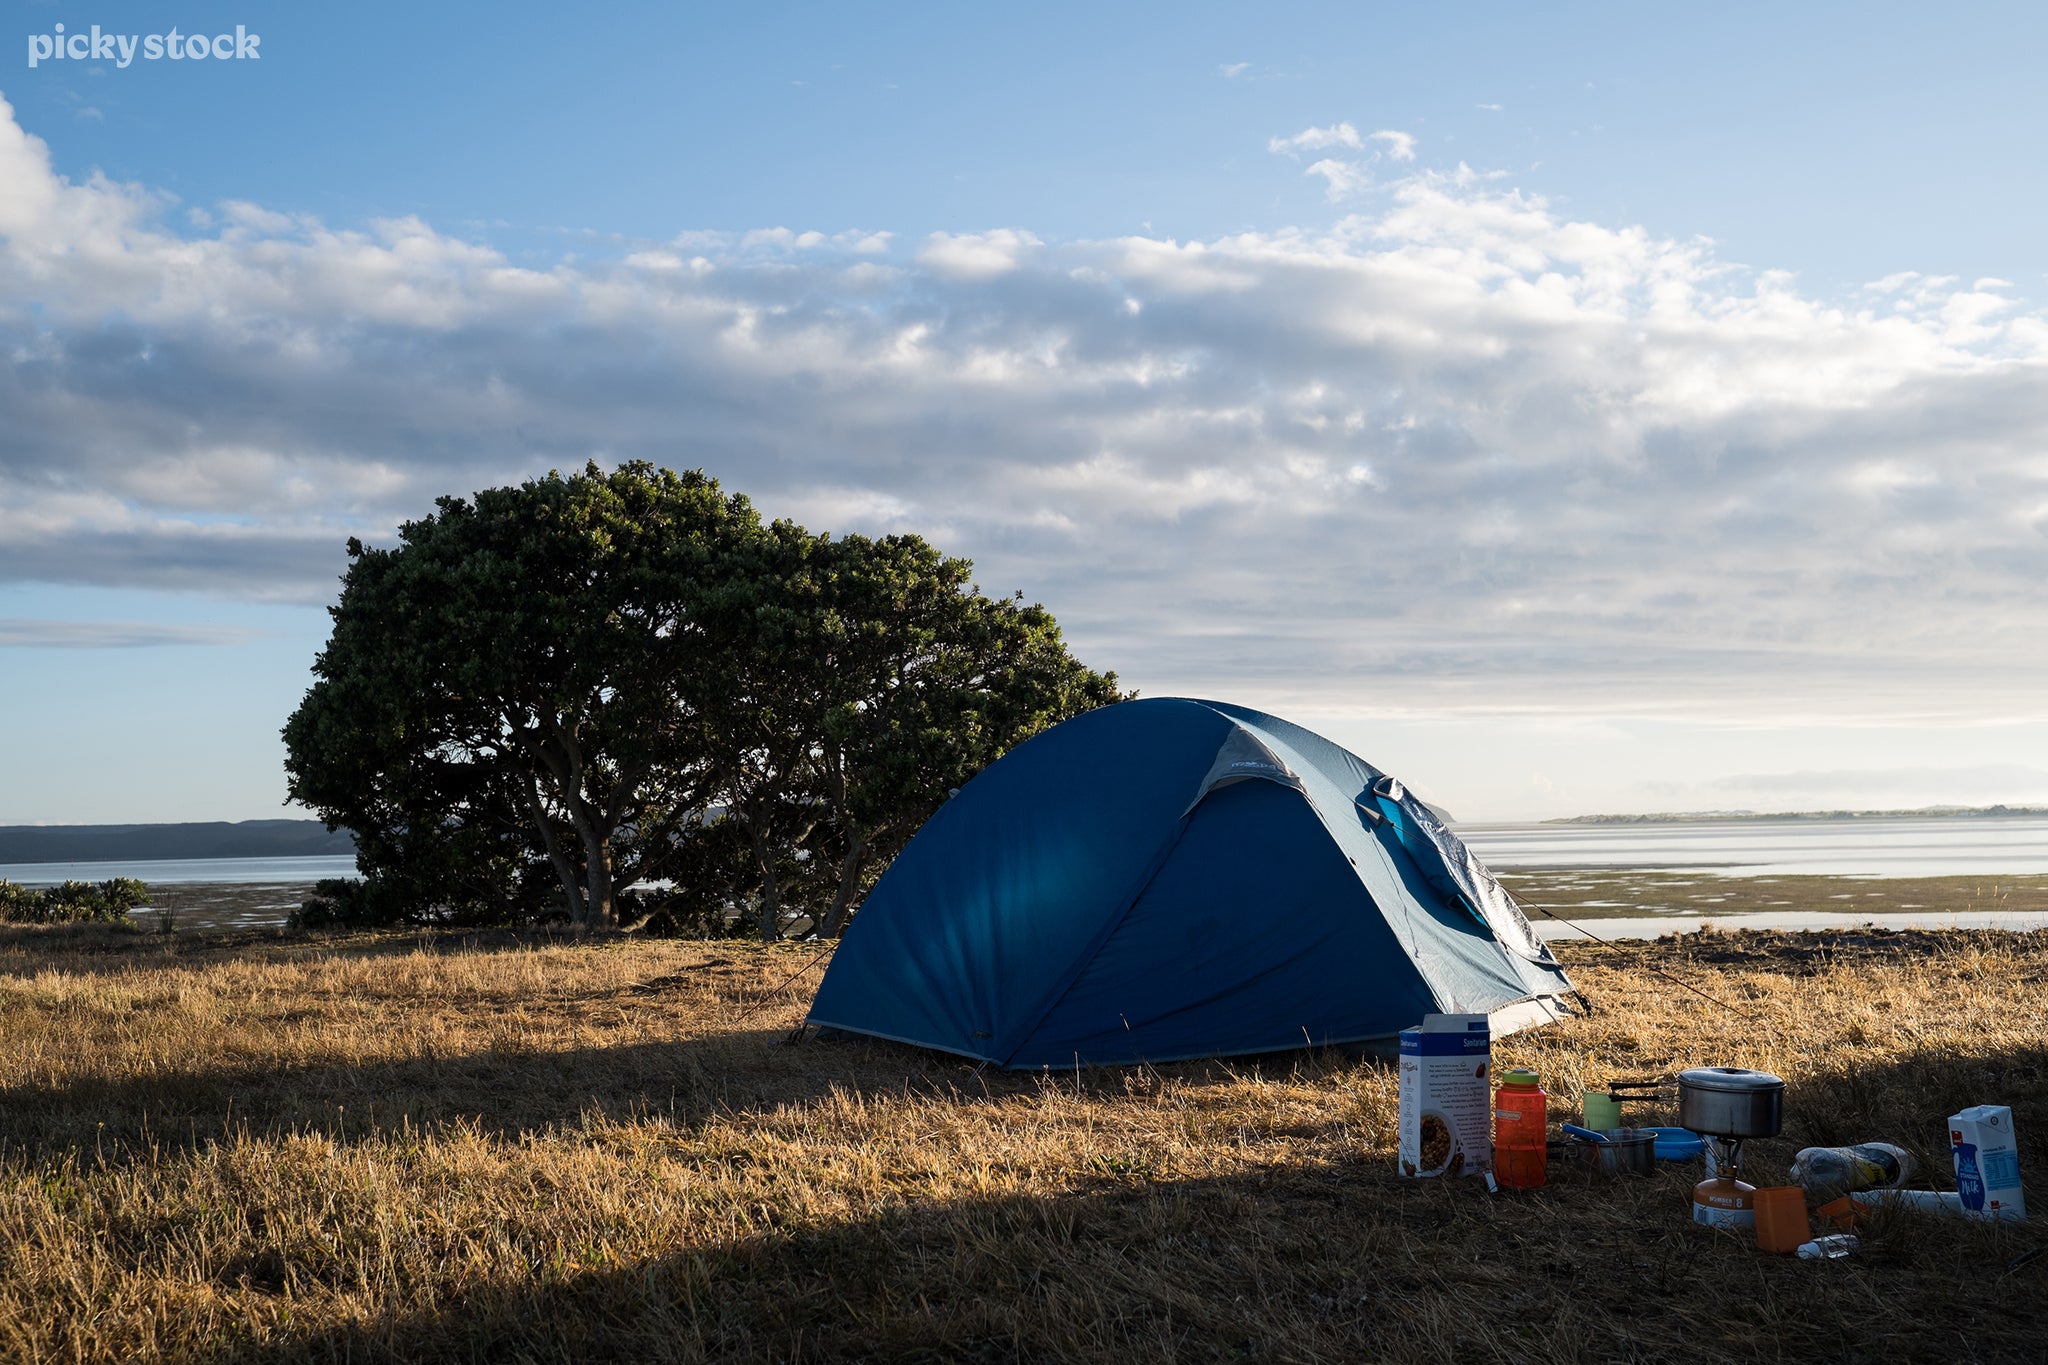 A landscape of a blue camping tent and cooking equipment on a patch of brown wild grass next to a lake. Behind the tent is a large pohutakawa tree not in bloom. The morning light cast ripples of light across the campsite and lake.